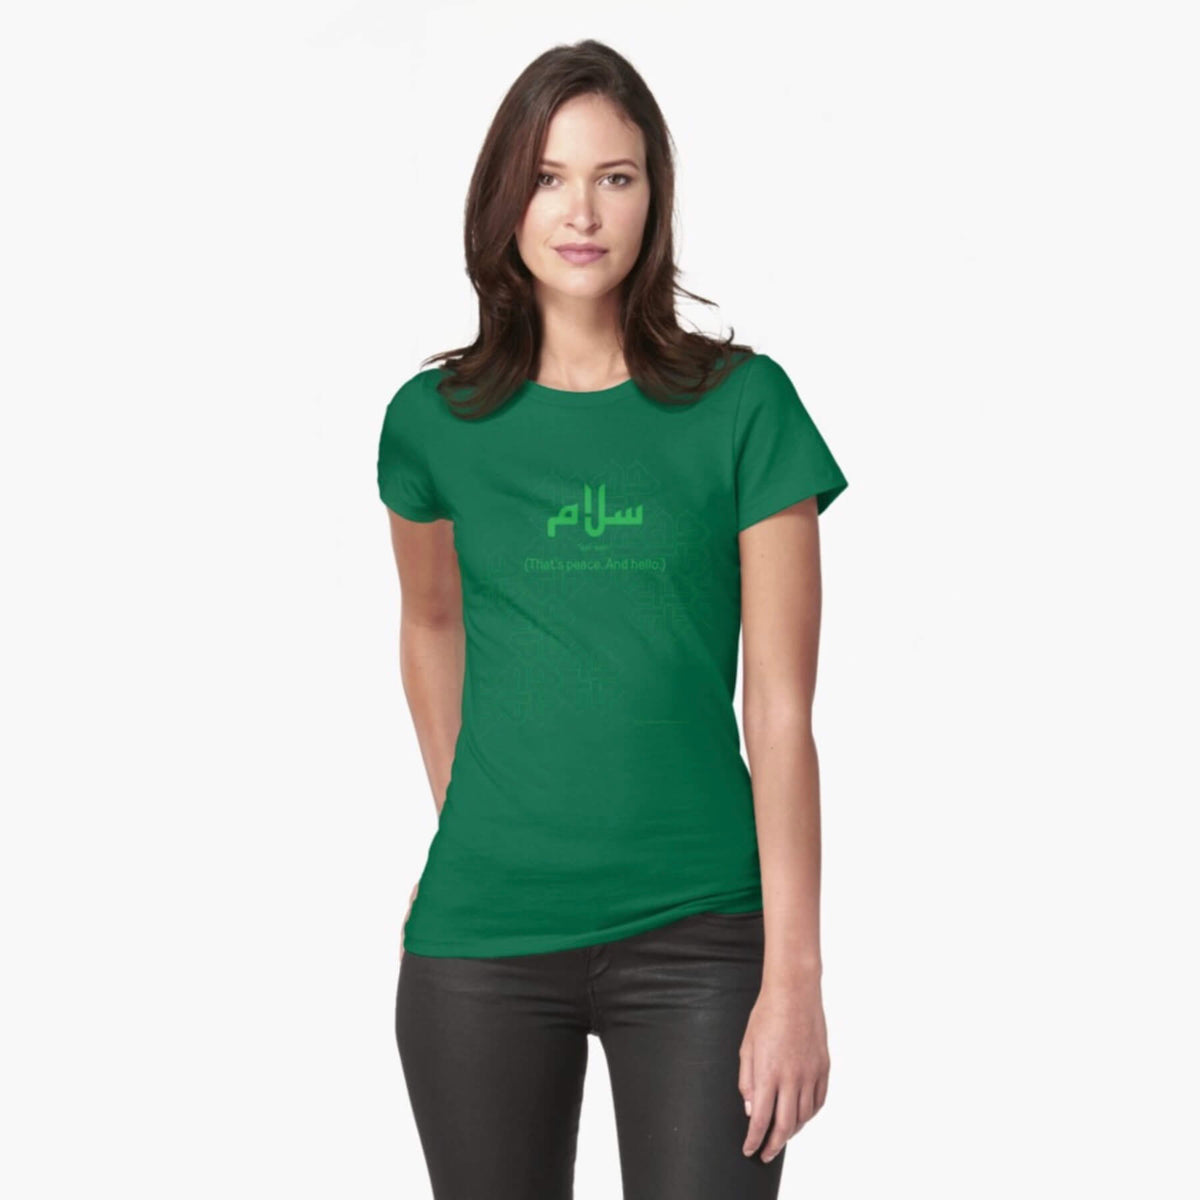 A white female model with hazel eyes and brown shoulder-length hair wears the Haluna Happy Names exclusive &#39;Salaam—Arabic Key Words&#39; design emerald-green fitted t-shirt and tight black jeans. The word &#39;salaam&#39; is written in green in Arabic with a kufic-style font, and beneath it in English the words &quot;Sal-aam&quot; and beneath that the words &#39;(That means peace. And hello)&#39;. The text is positioned on the tshirt so it falls across the chest of the model against a complementary green patterned background print.